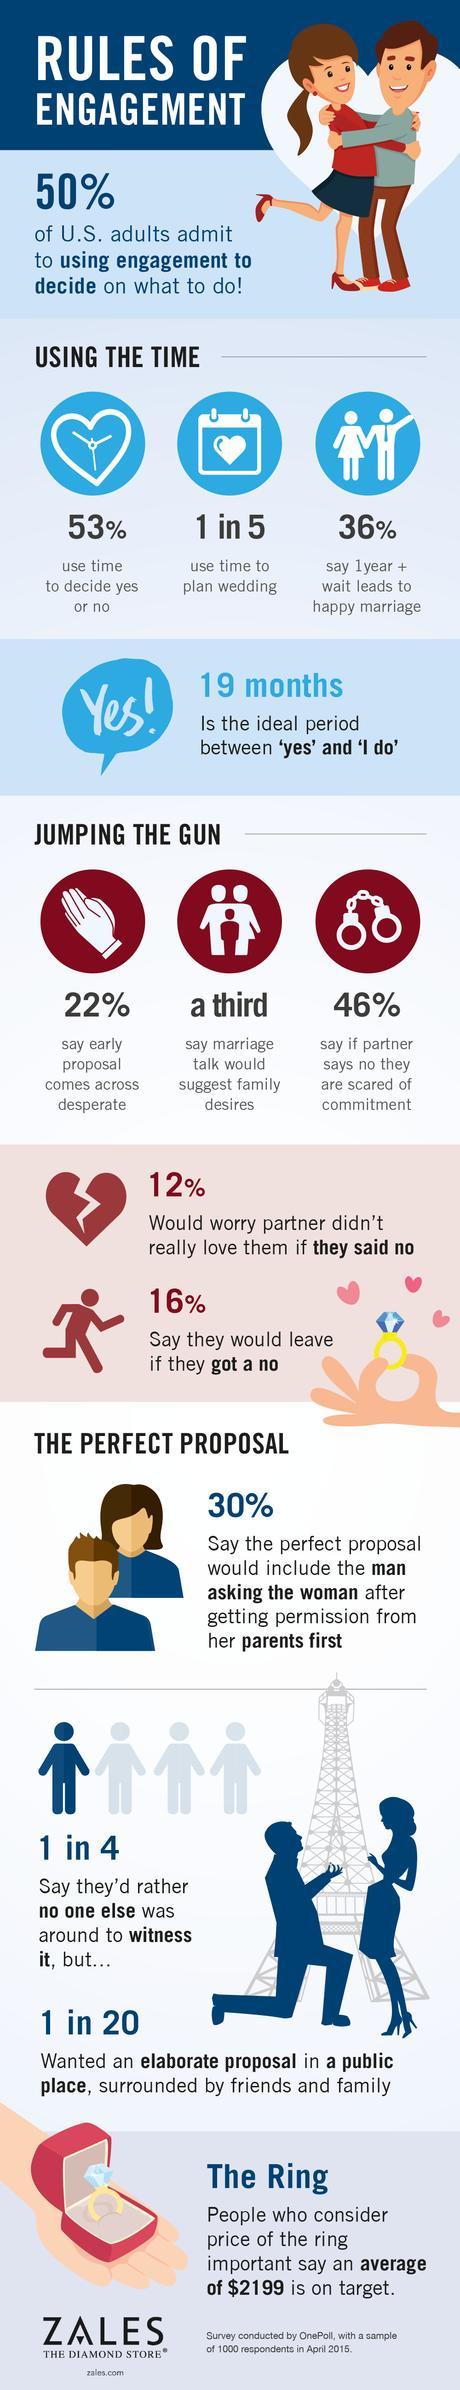 Americans See Engagement as a time to ‘try out’ the Relationship